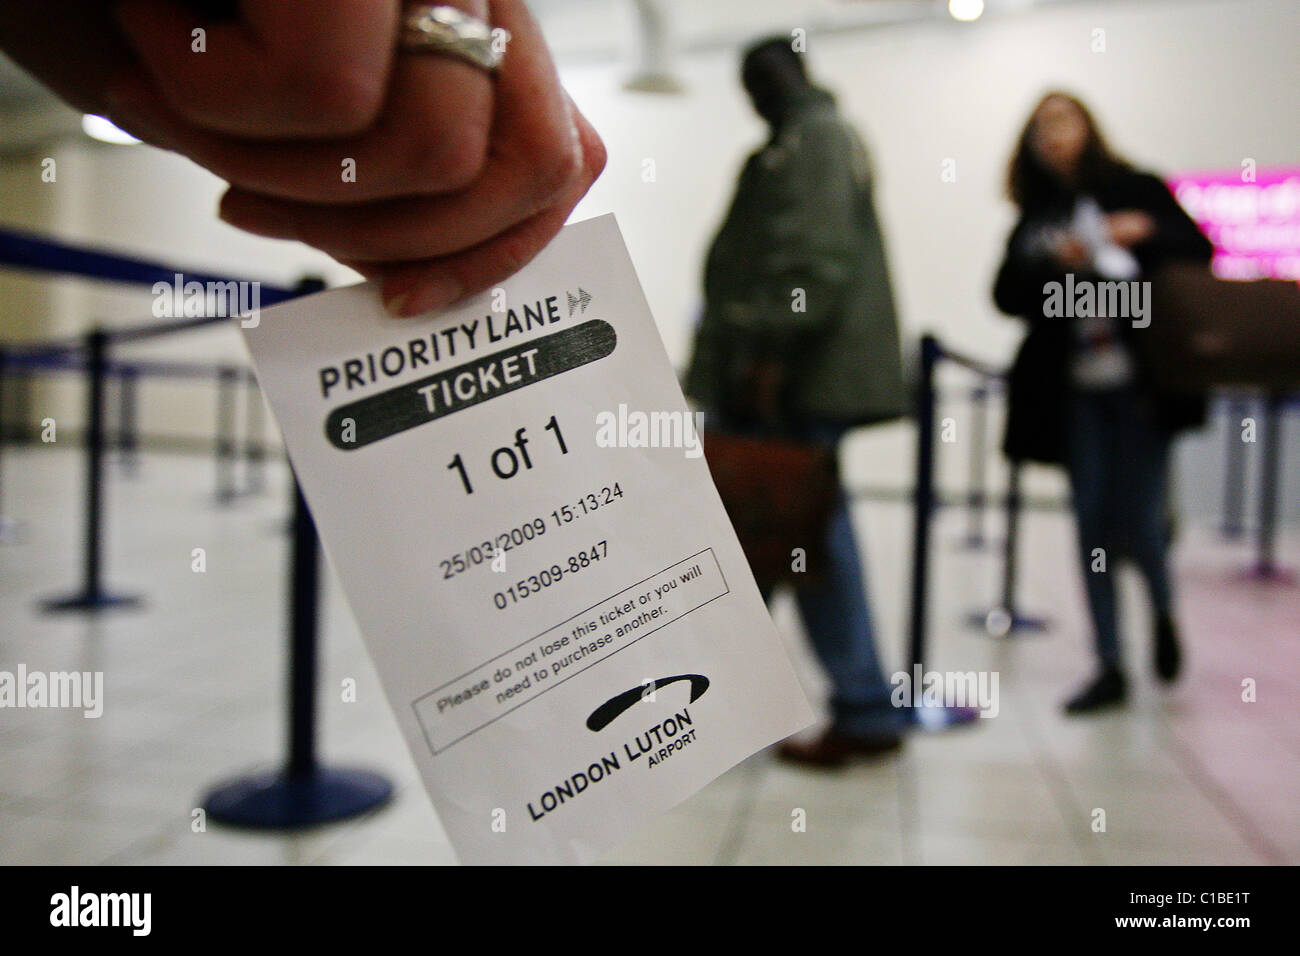 Luton London Airport's 'priority lane' for security. Passengers who buy a ticket can jump the security wait. Stock Photo